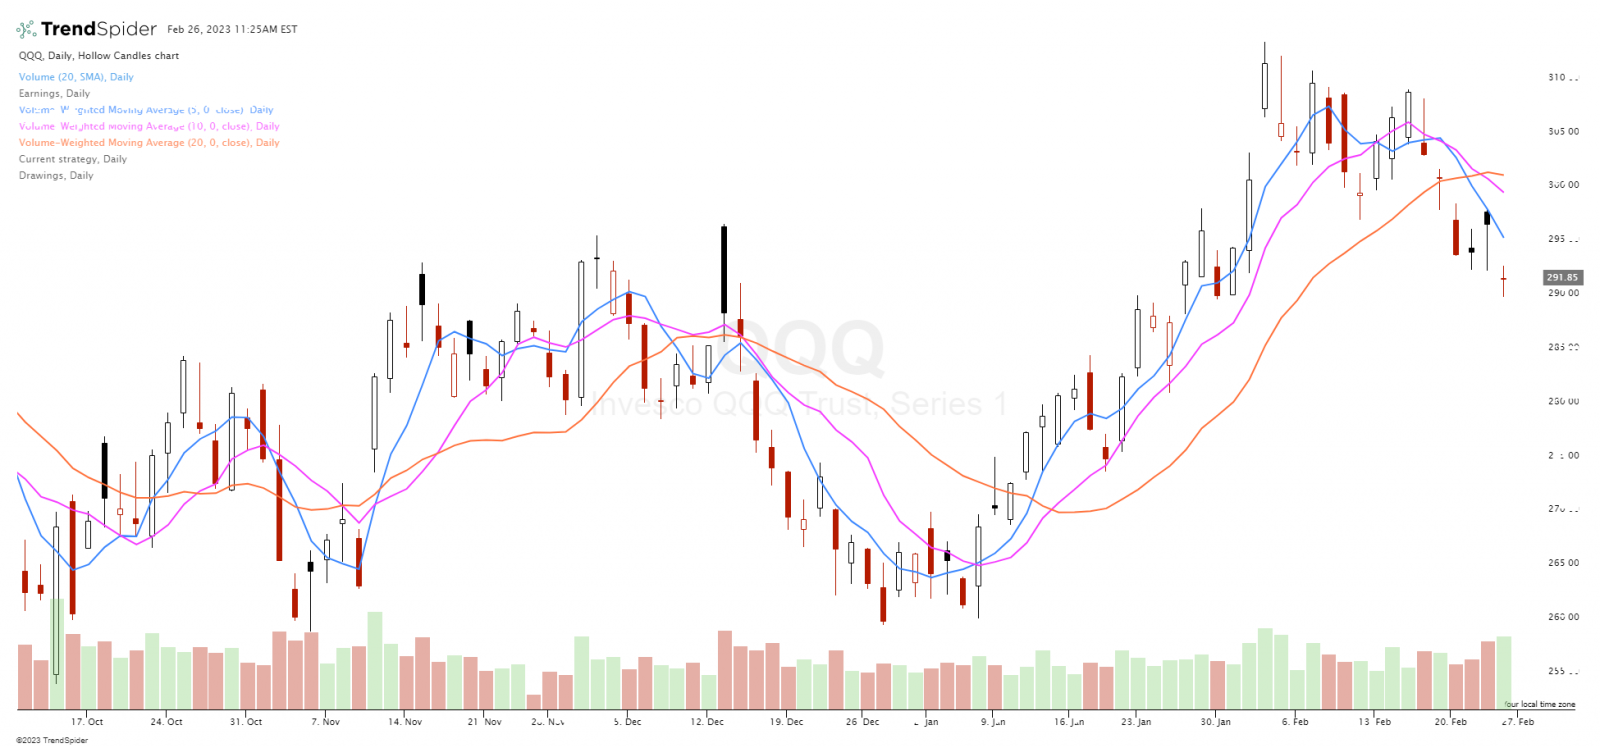 Volume Weighted Moving Average (VWMA)